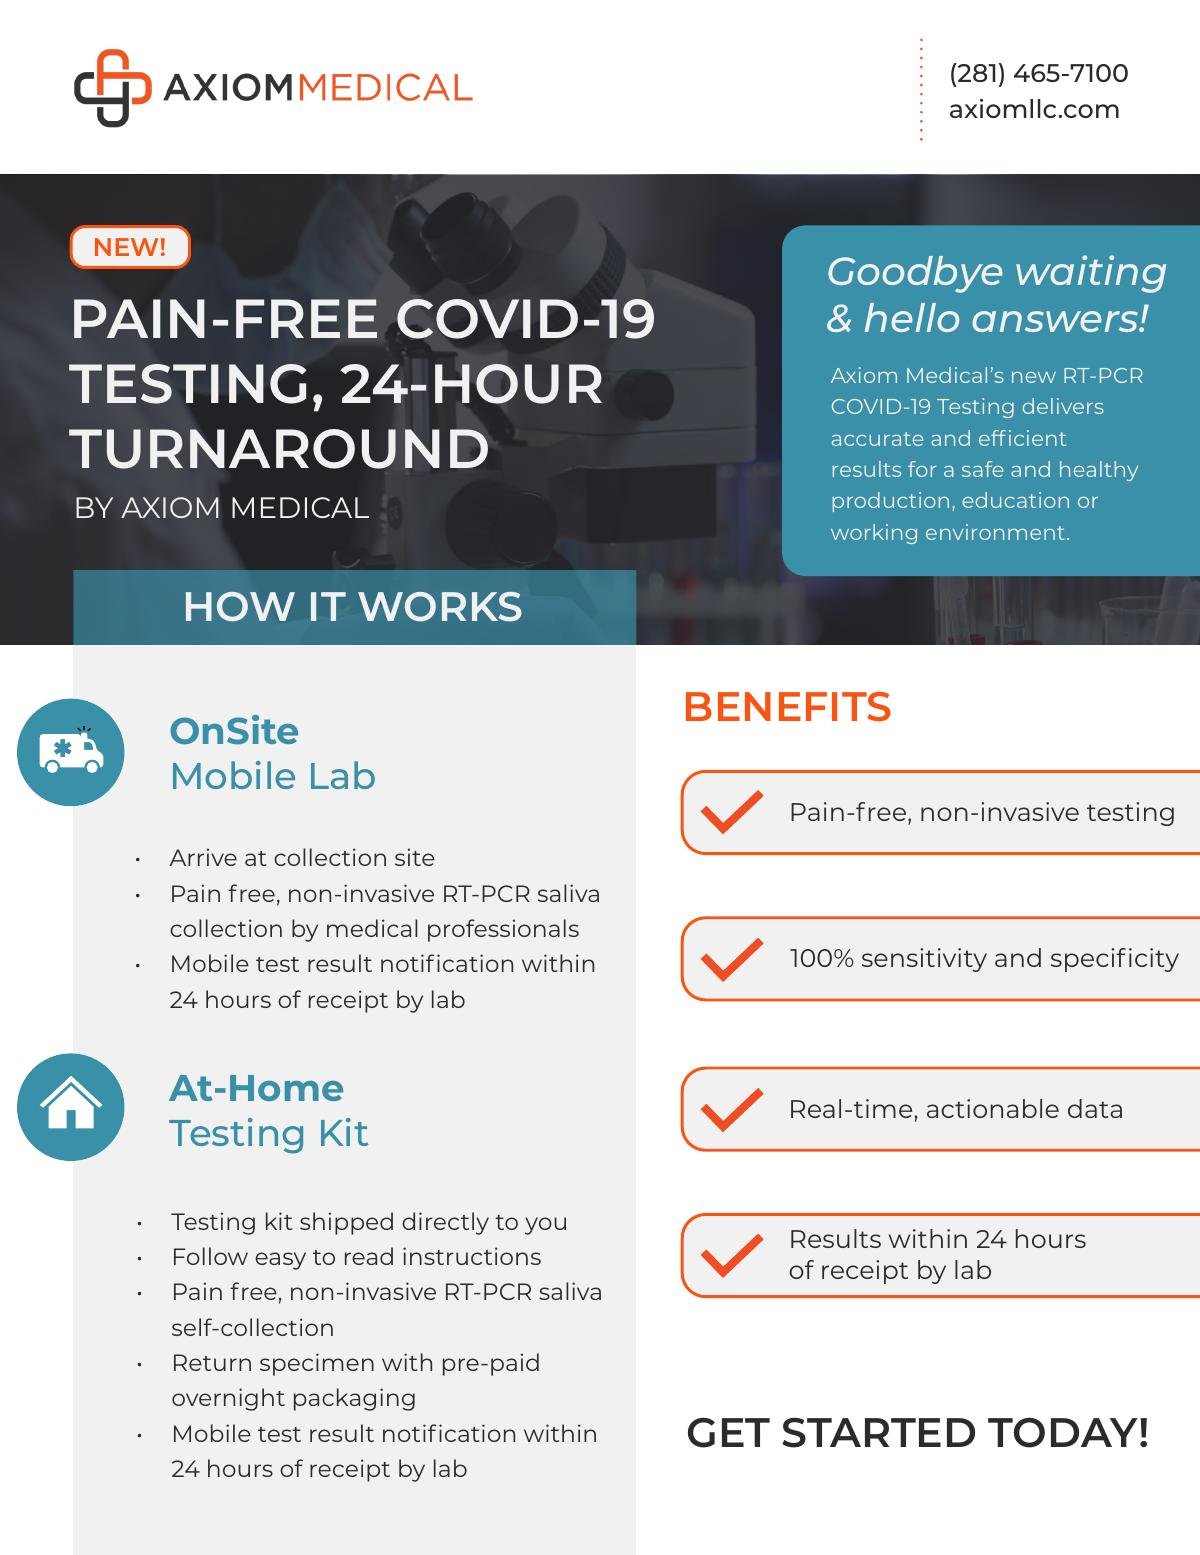 24-Hour COVID-19 Testing Services by Axiom Medical